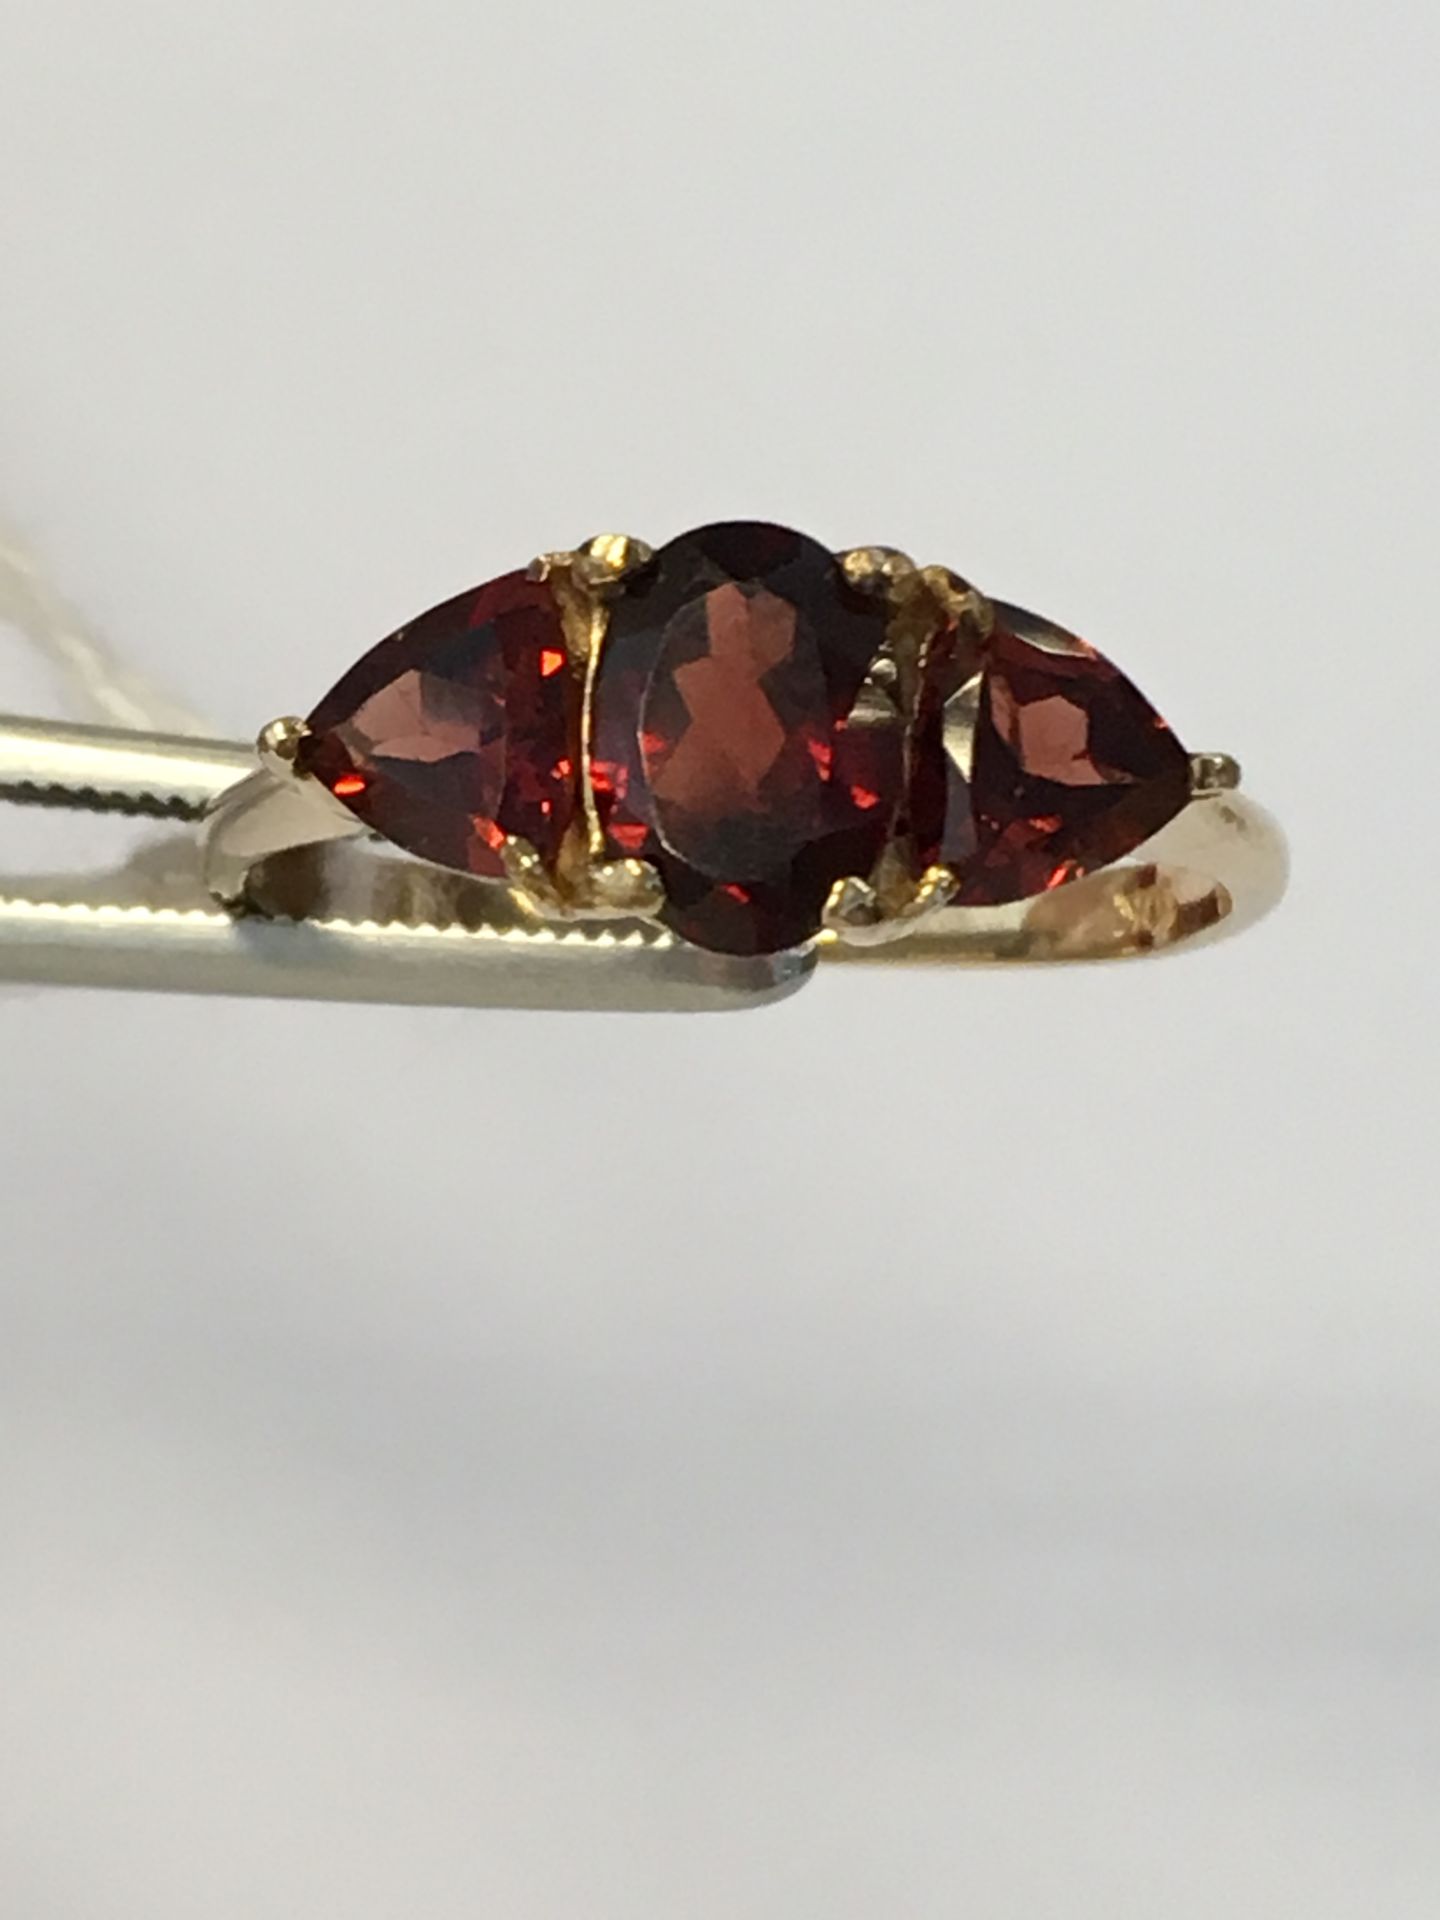 10K Yellow Gold ring with 3 Garnet Stones TW: 10ct - Image 2 of 3